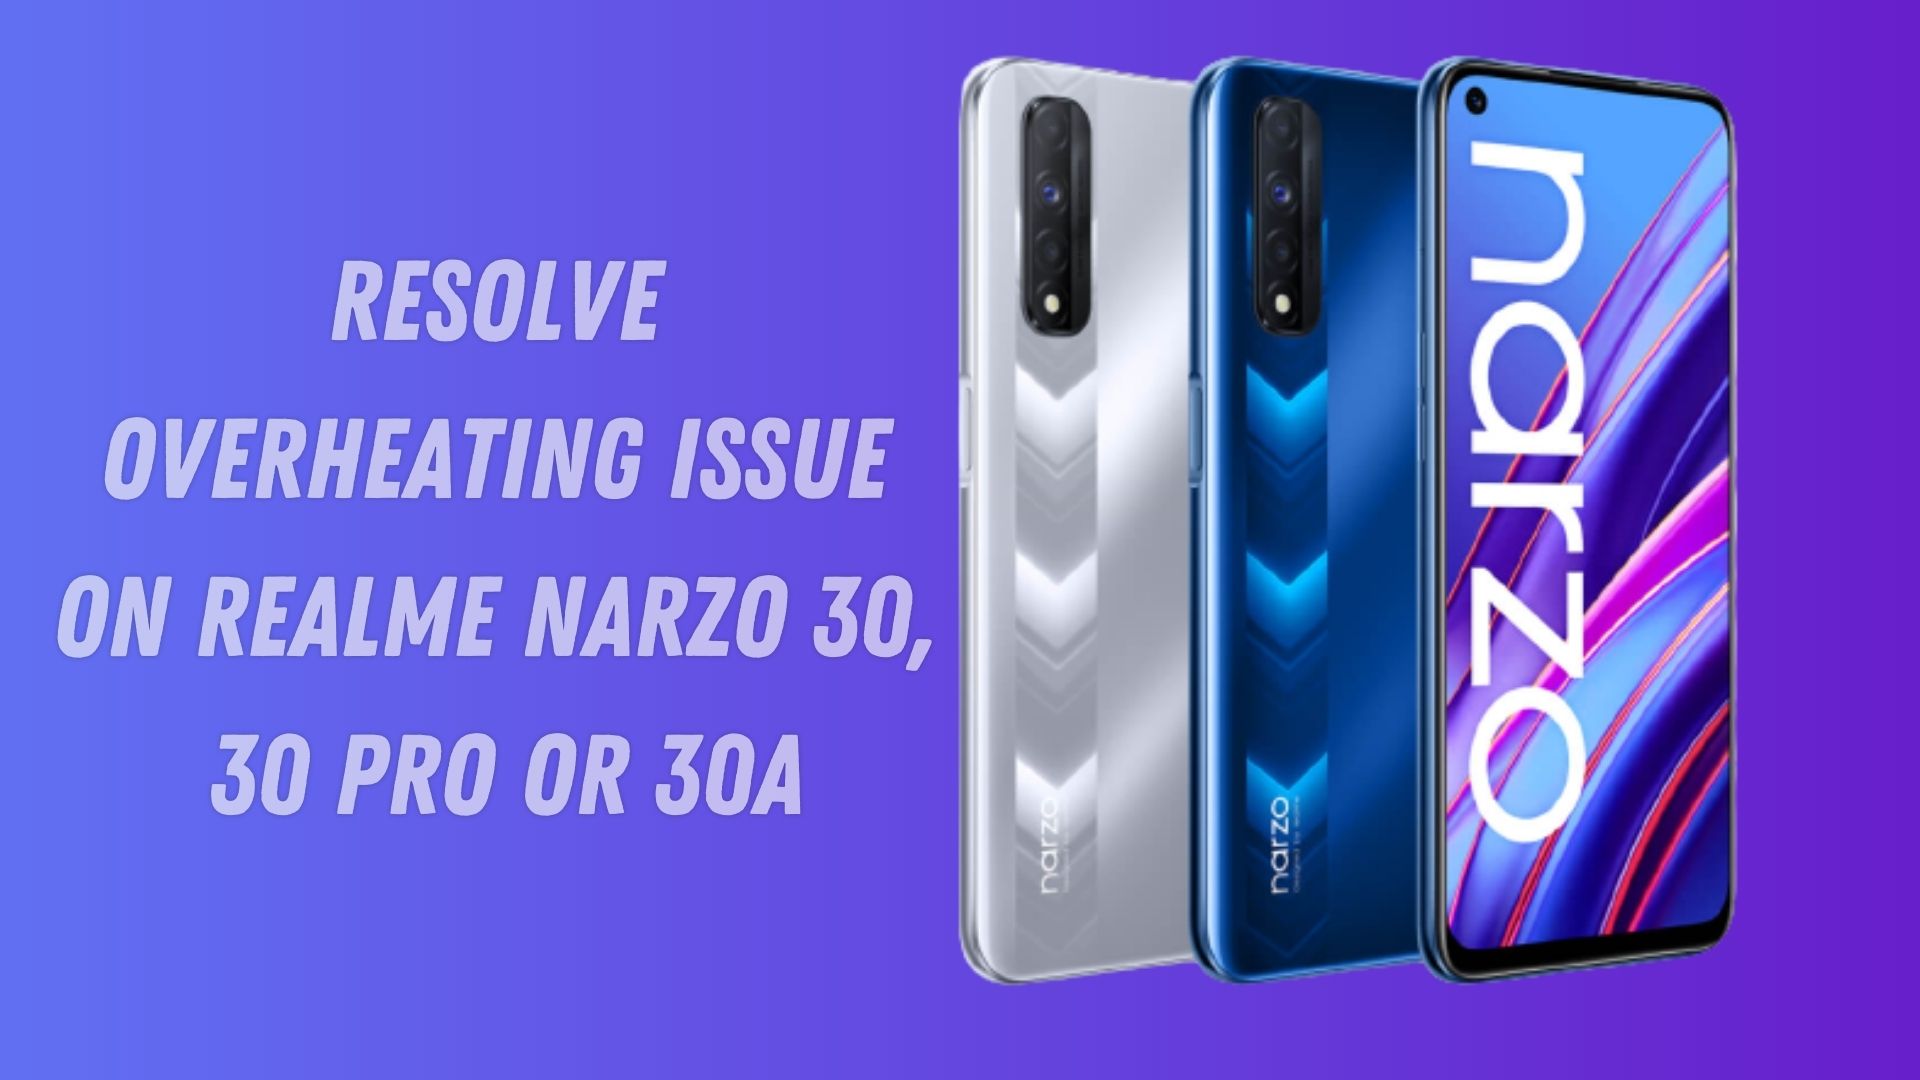 Resolve Overheating Issue on Realme Narzo 30, 30 Pro or 30A